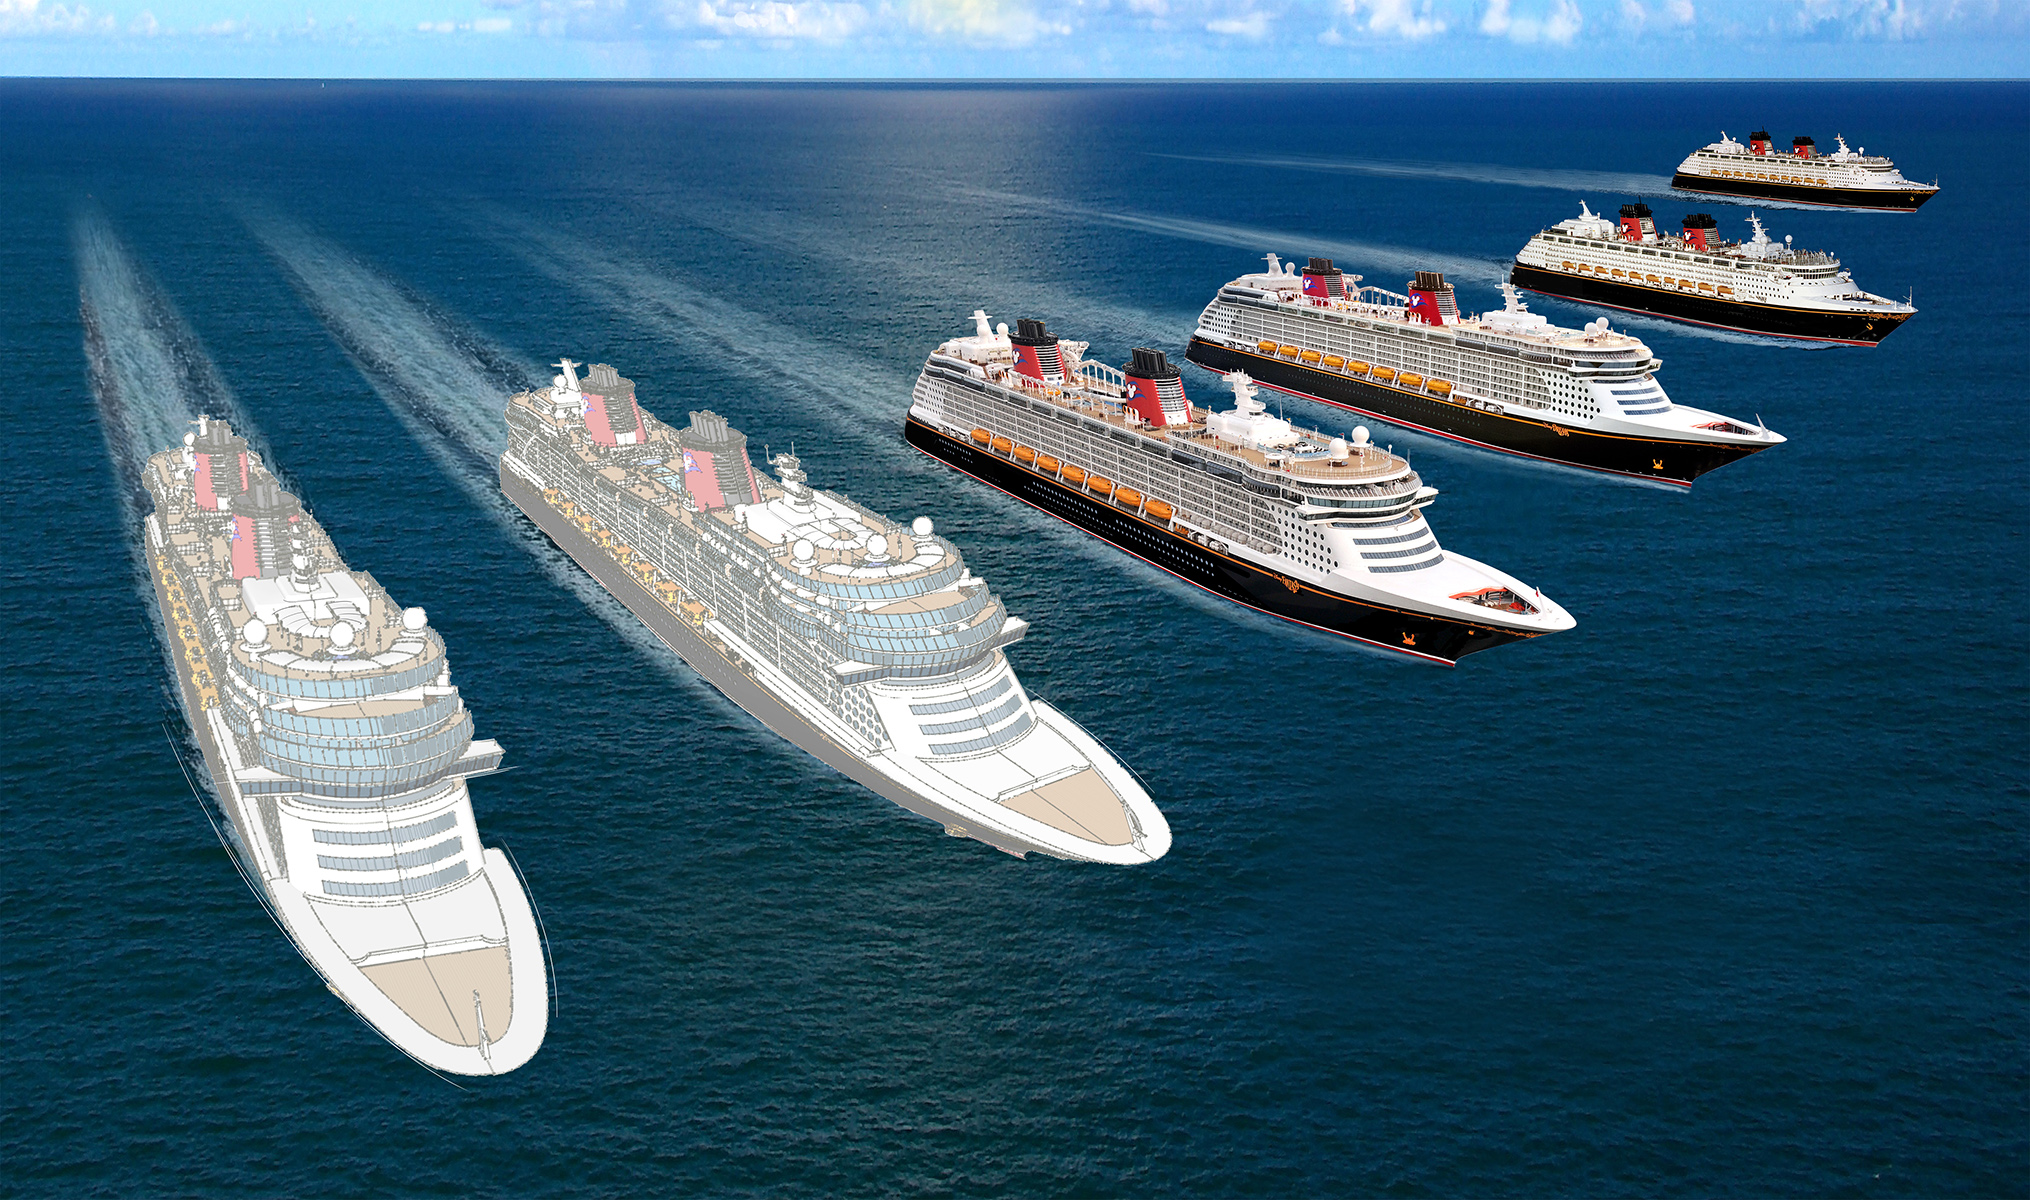 New DCL ships